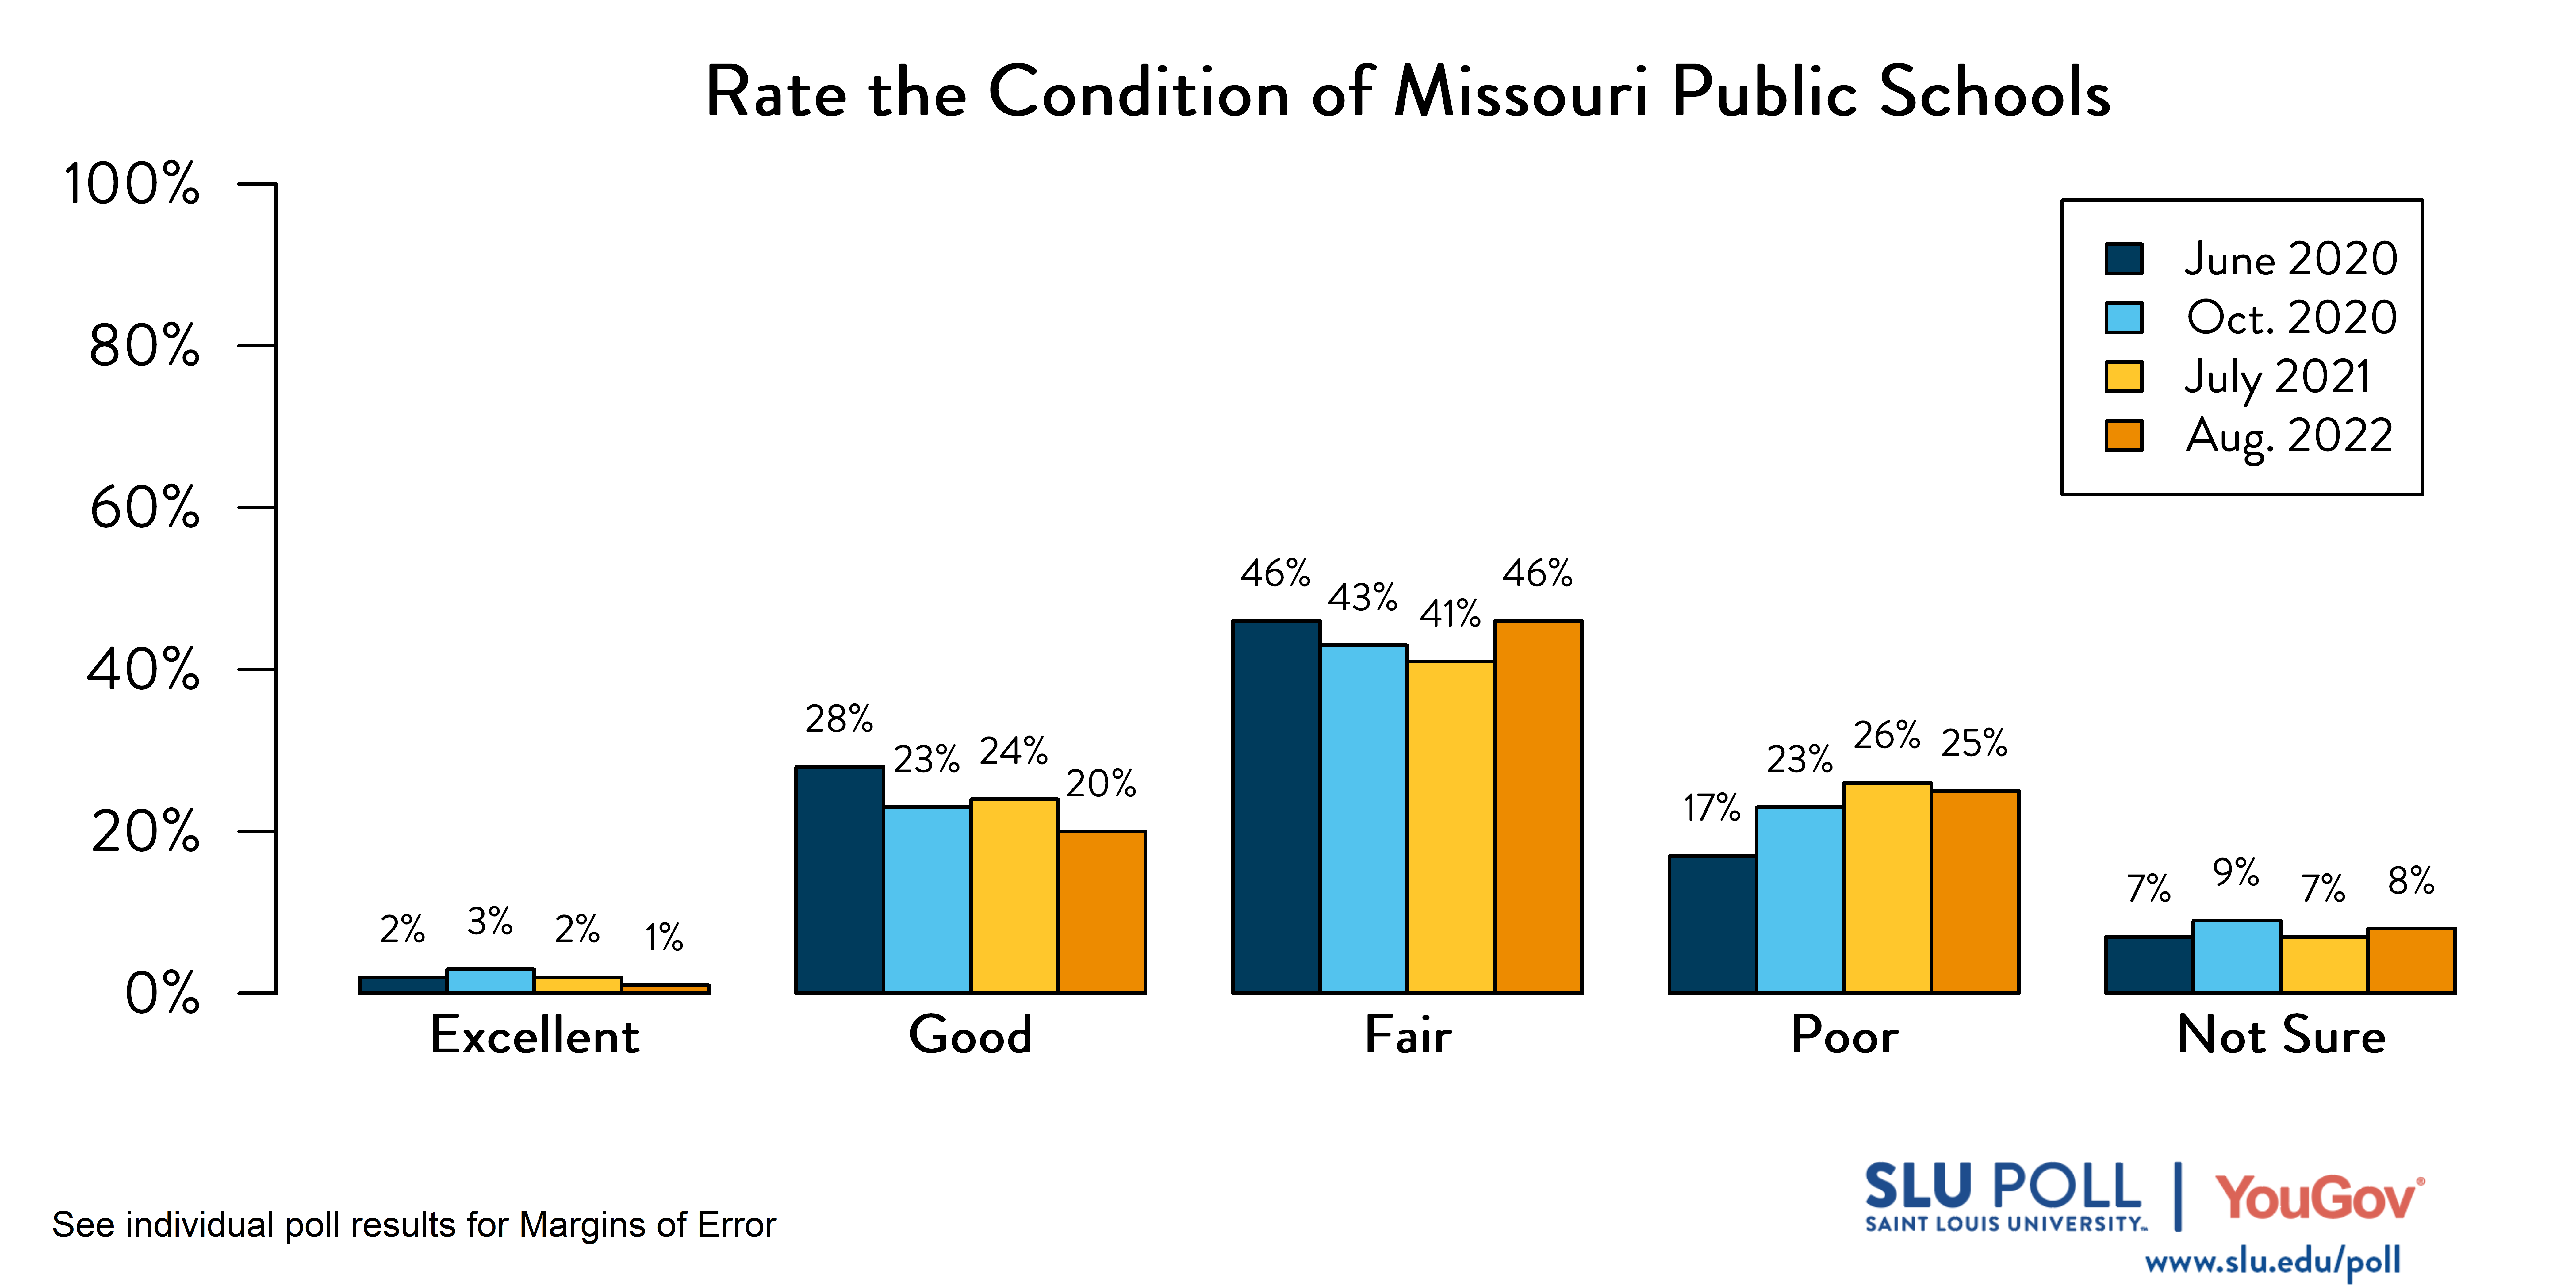 Likely voters' responses to 'How would you rate the following: Public Schools in the State of Missouri?'. June 2020 Voter Responses 2% Excellent, 28% Good, 46% Fair, 17% Poor, and 7% Not Sure. October 2020 Voter Responses: 3% Excellent, 23% Good, 43% Fair, 23% Poor, and 9% Not sure. July 2021 Voter Responses: 2% Excellent, 24% Good, 41% Fair, 26% Poor, and 7% Not sure. August 2021 Voter Responses: 1% Excellent, 20% Good, 46% Fair, 25% Poor, and 8% Not sure.